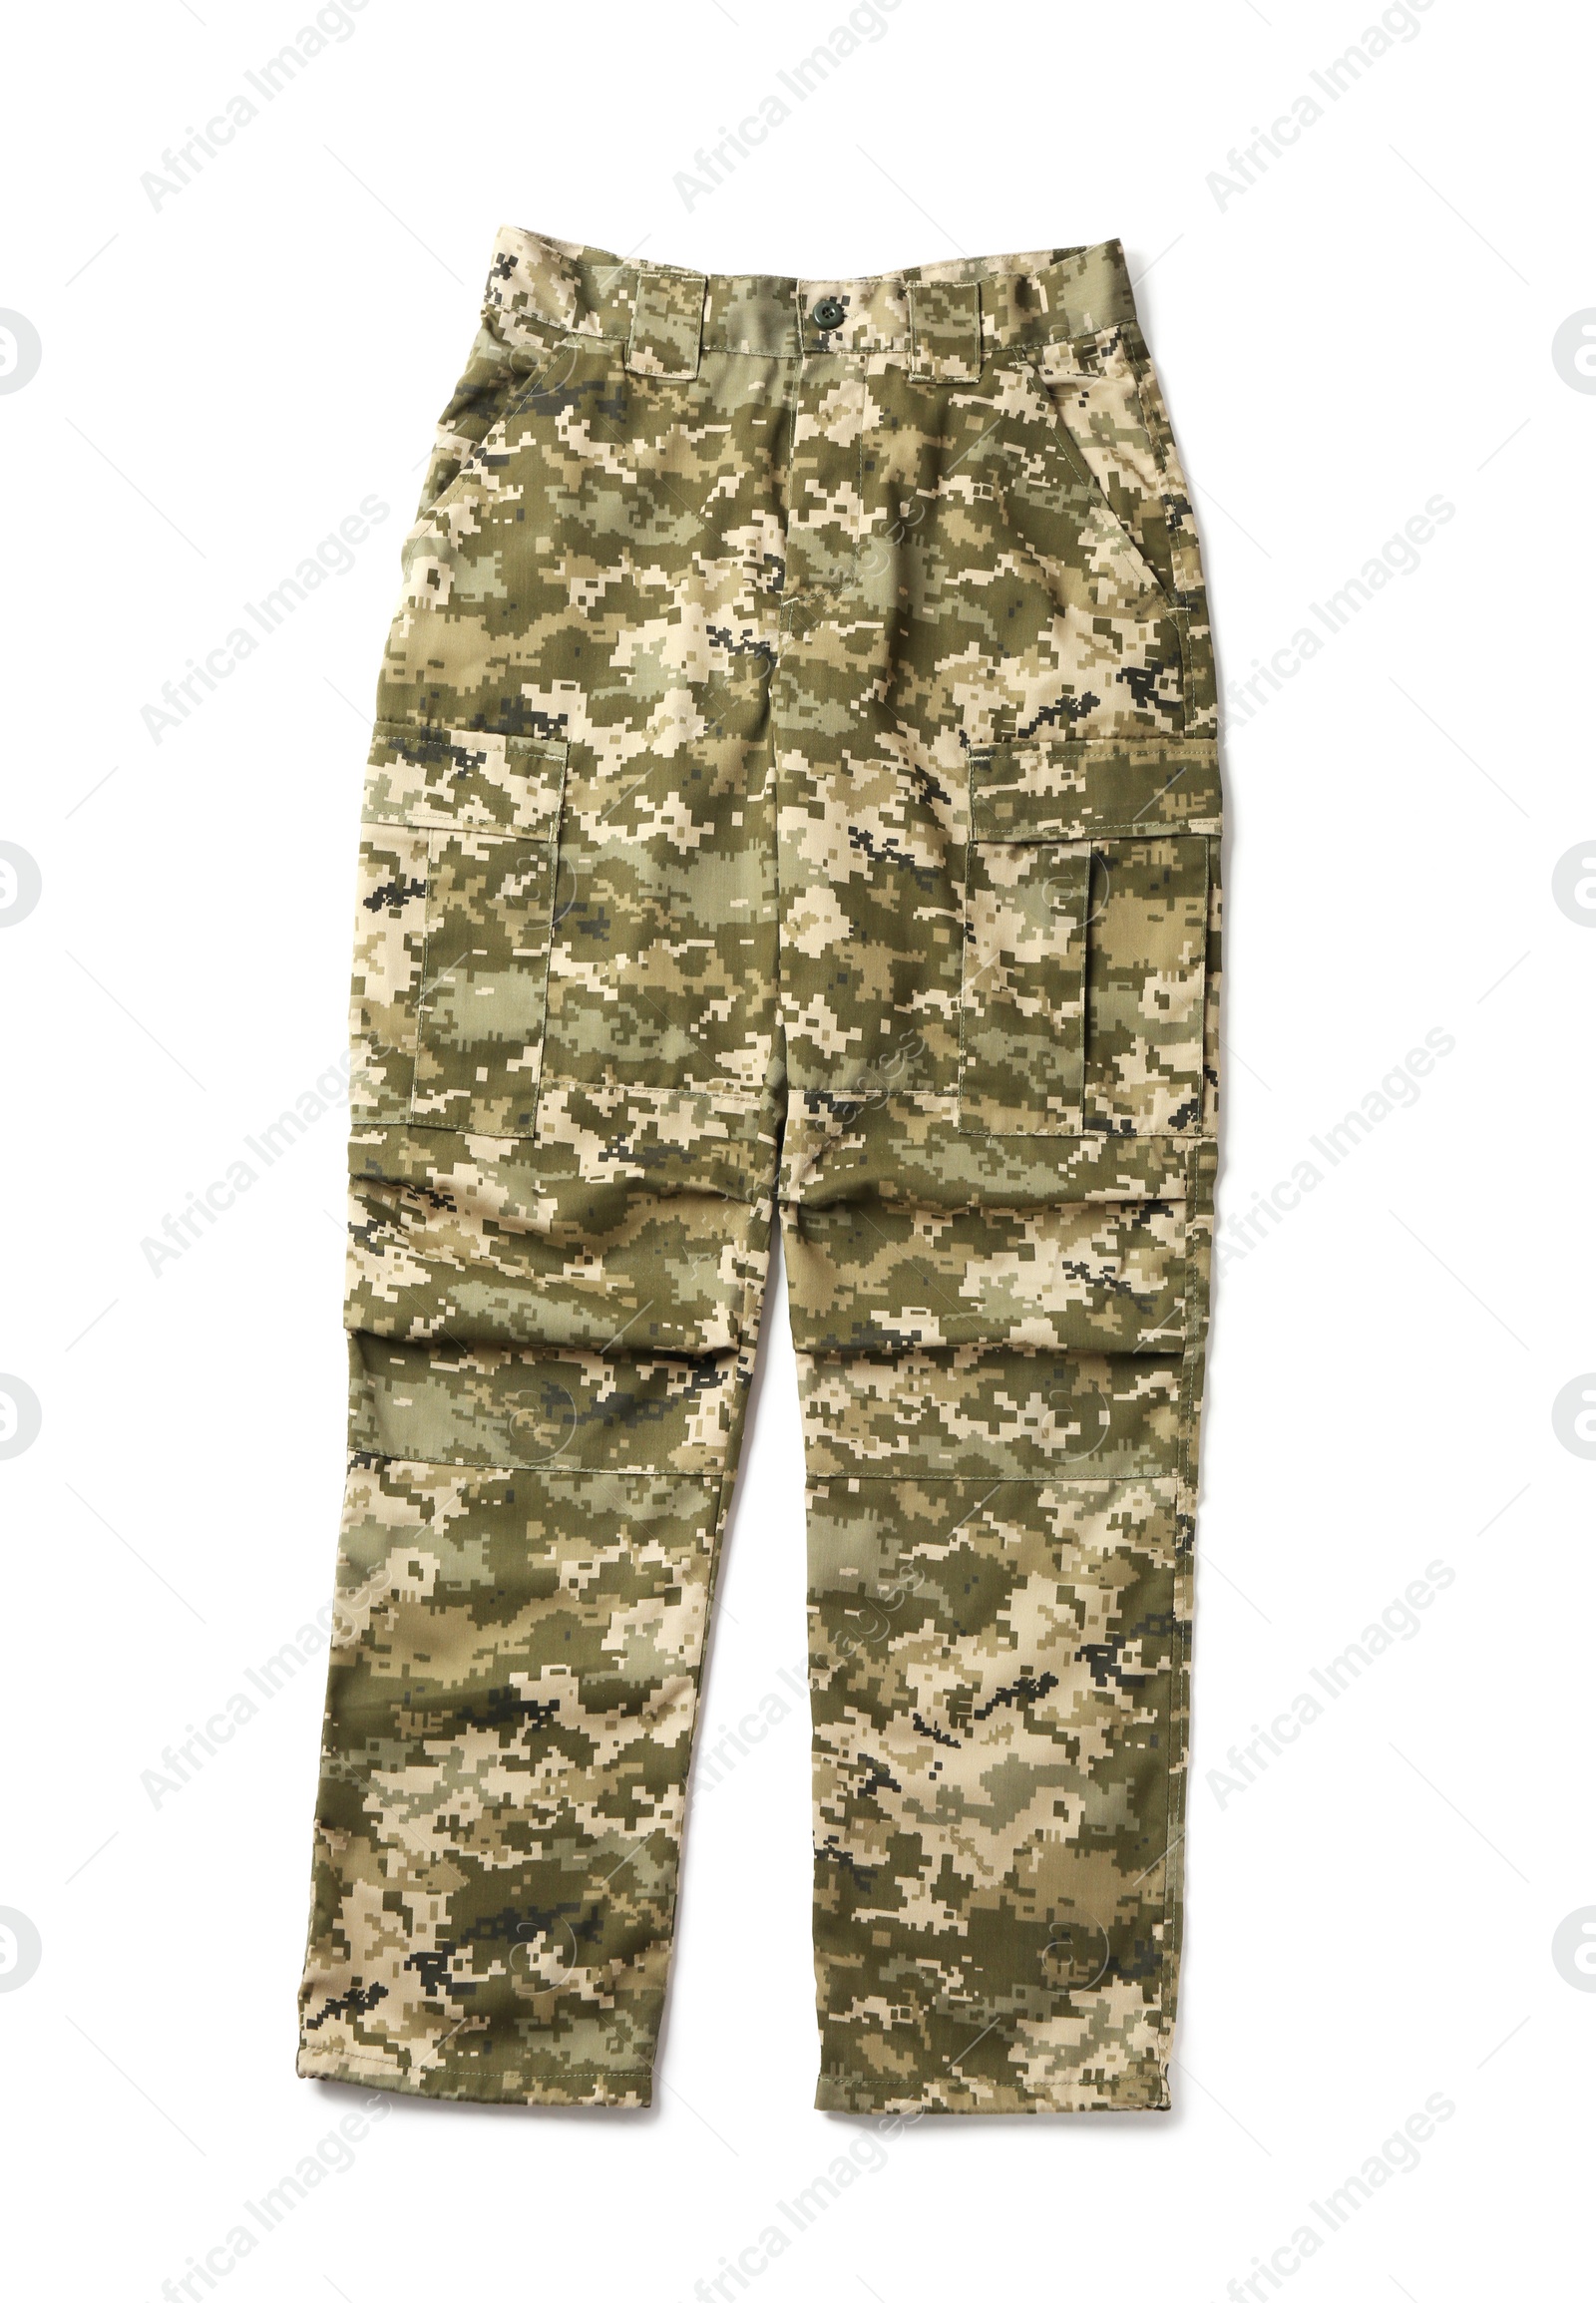 Photo of Military trousers on white background